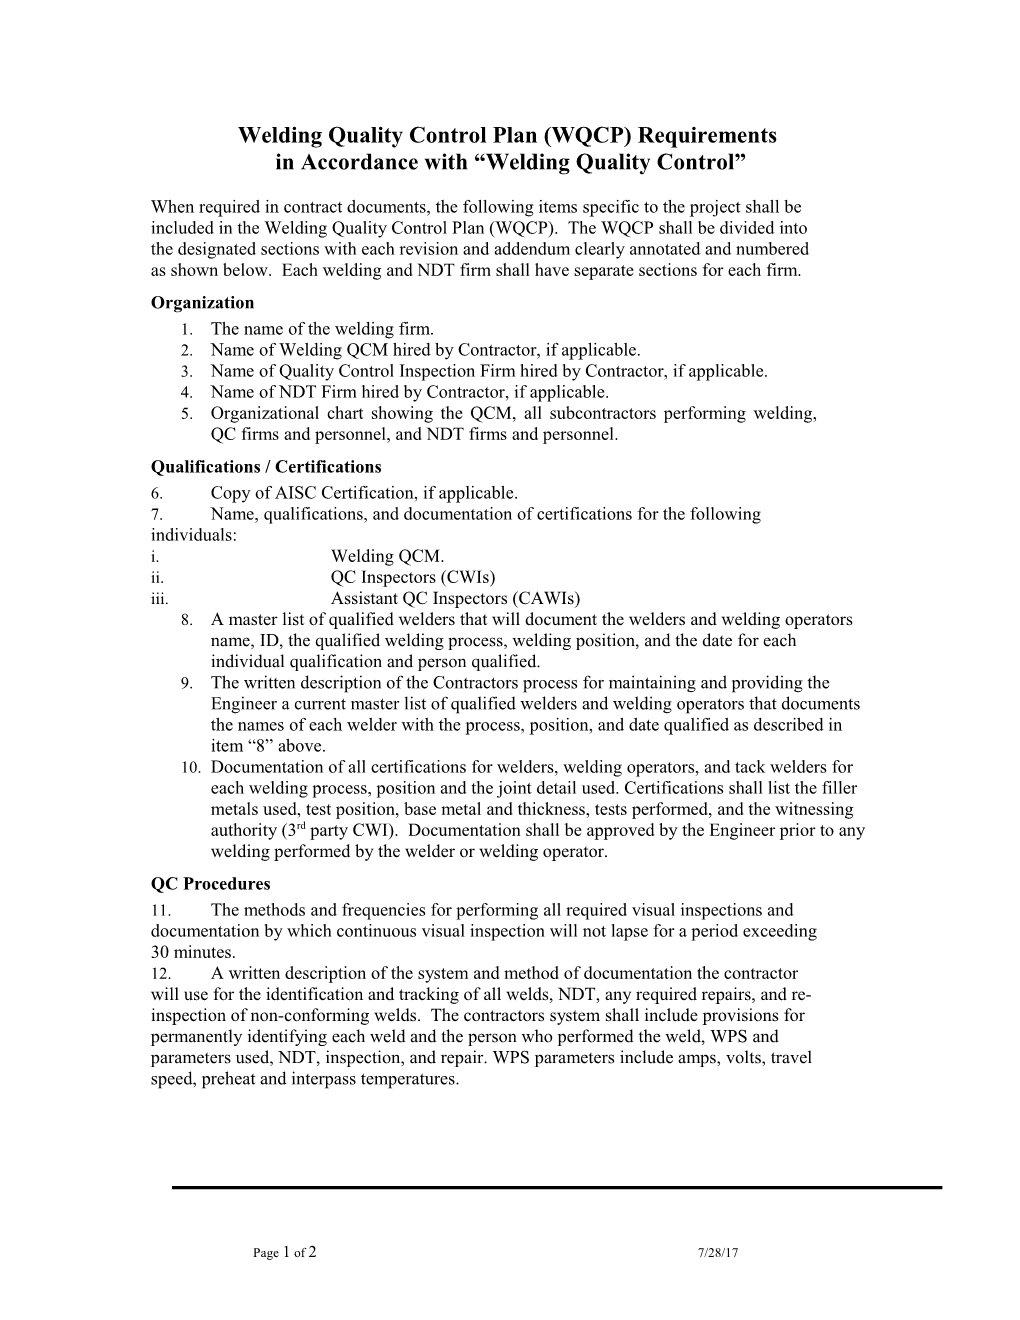 Welding Quality Control Requirements